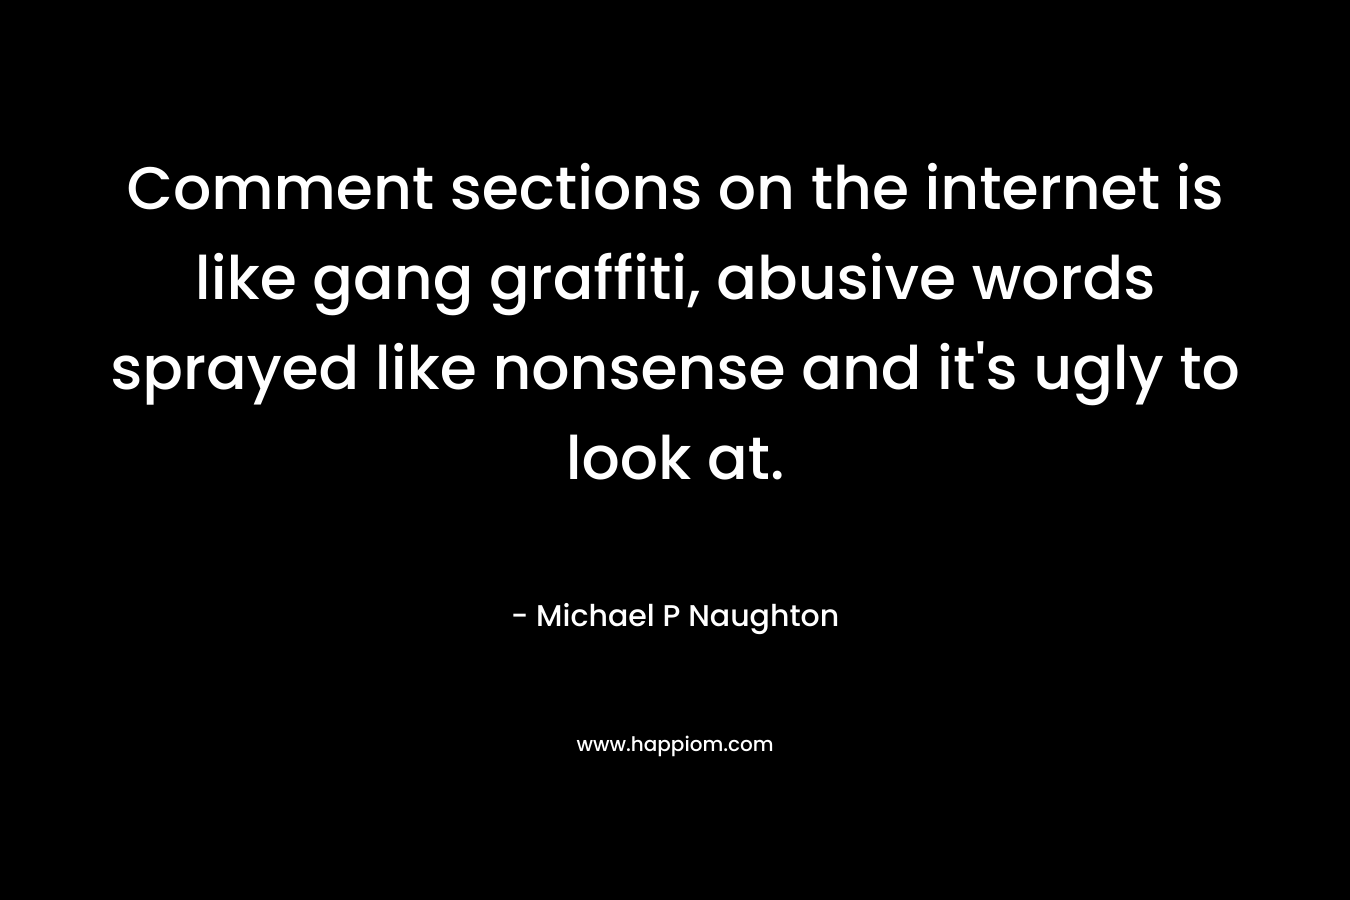 Comment sections on the internet is like gang graffiti, abusive words sprayed like nonsense and it's ugly to look at.